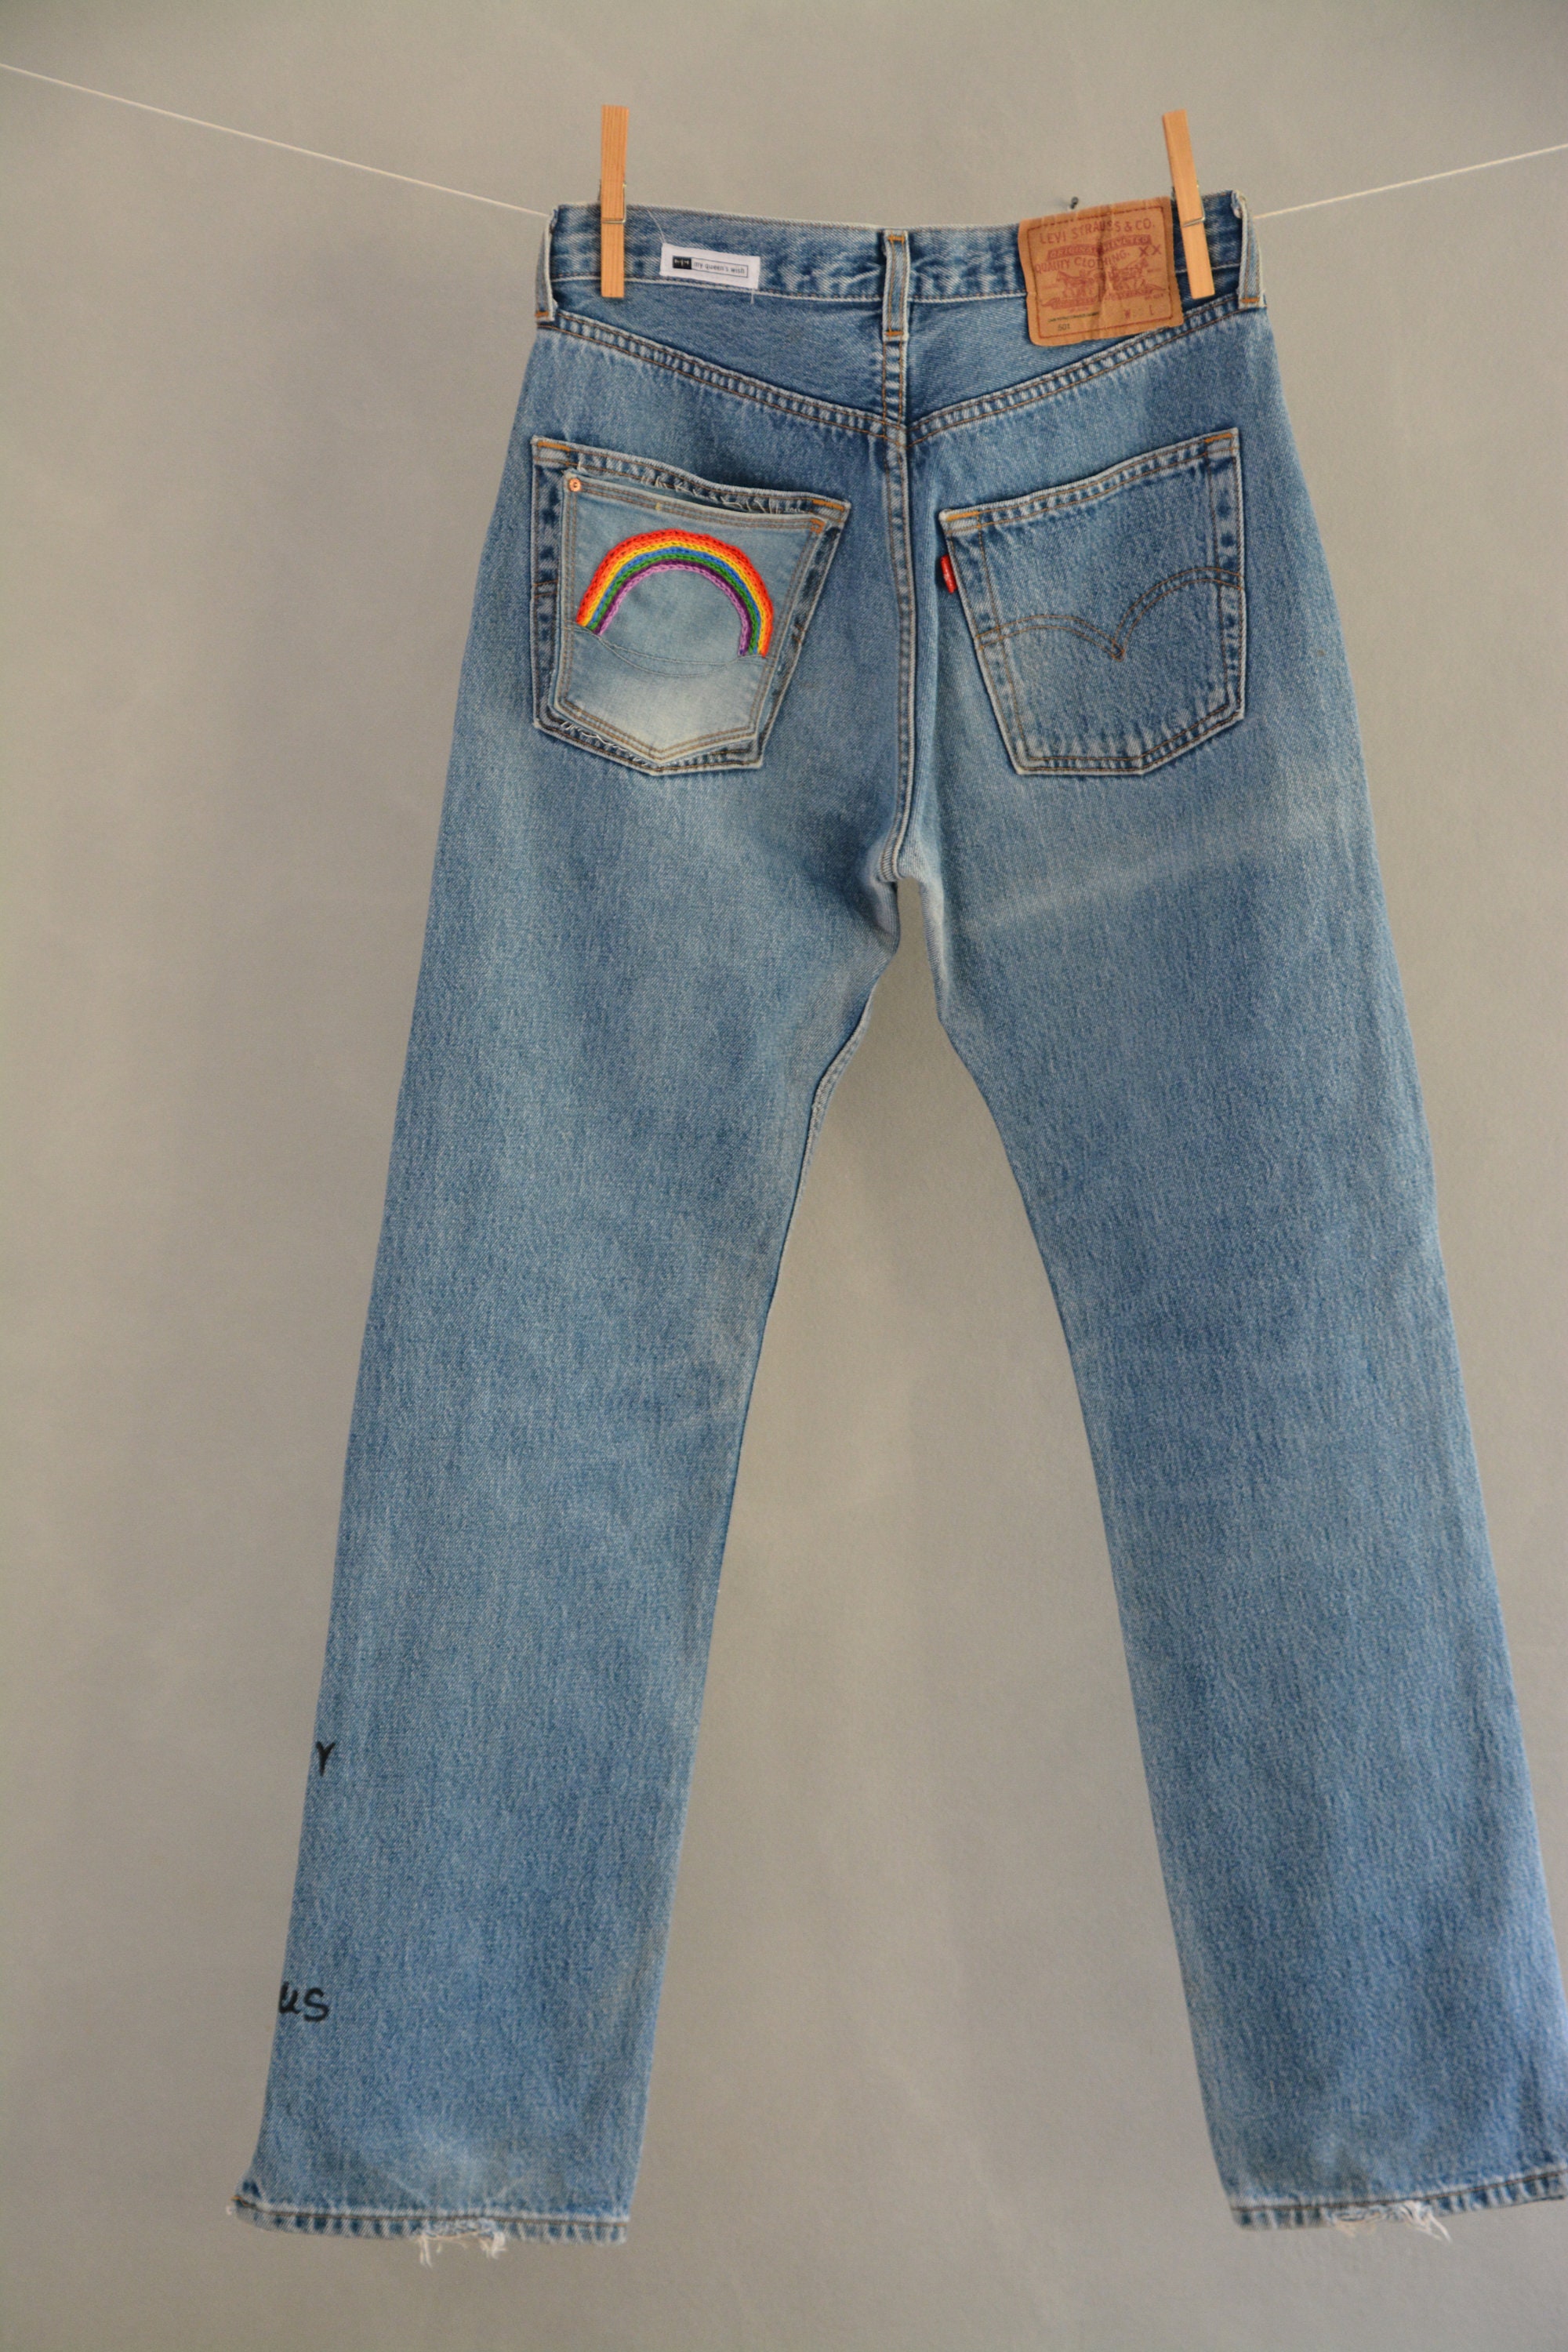 Rainbow Vintage Levi's Jeans Relaxed Mom Jeans Custom Made Jeans Made by  Order Personalized Your Jeans 